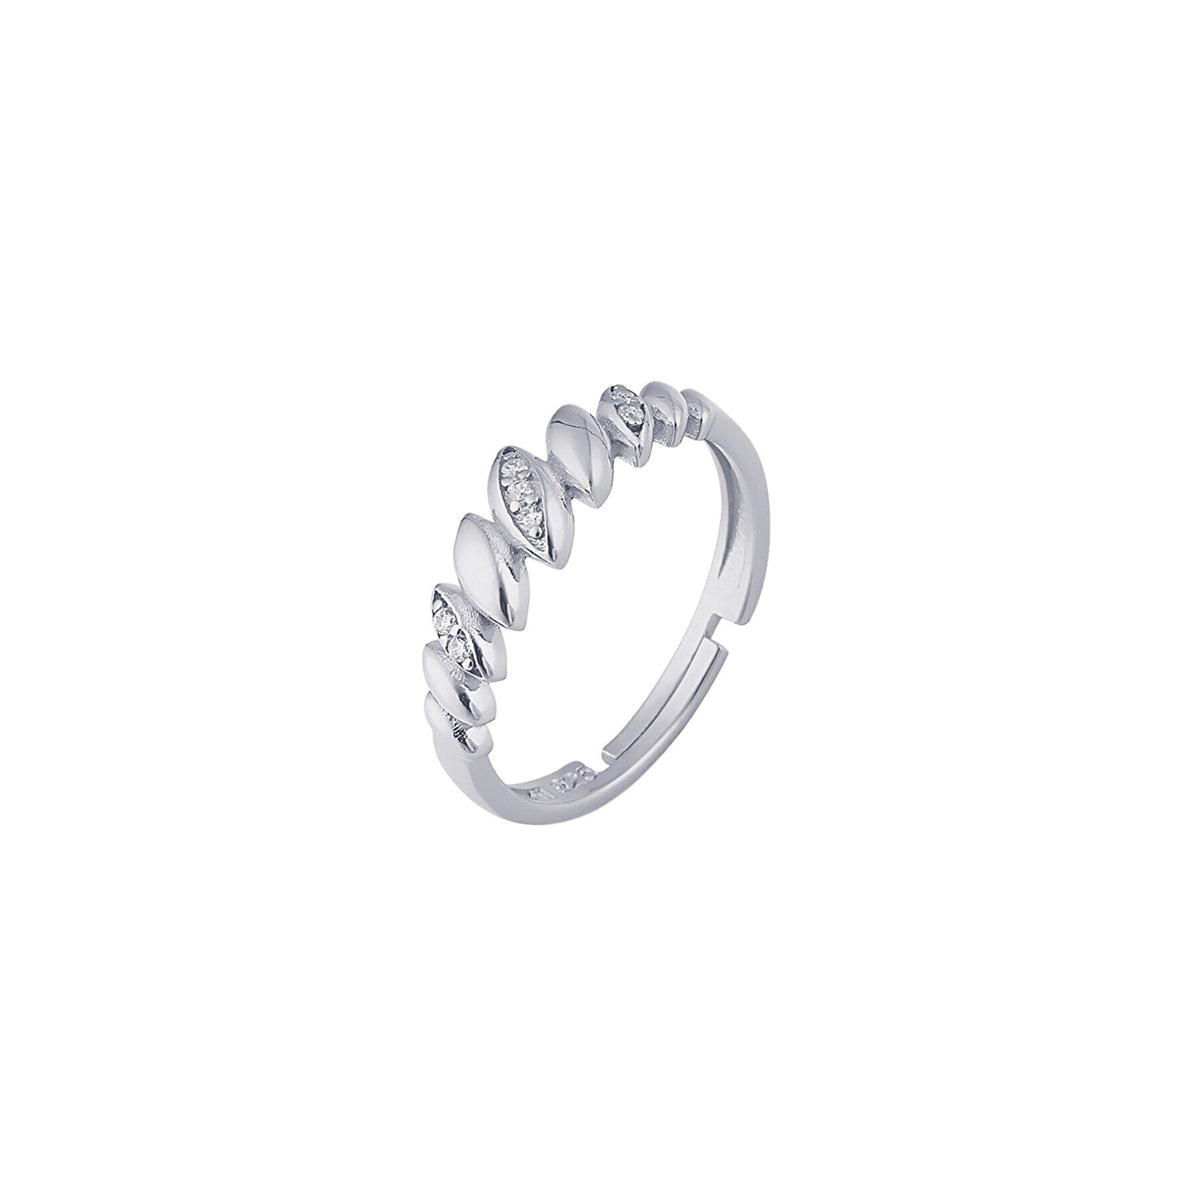 Lined Stones Marquise Sterling Silver Ring